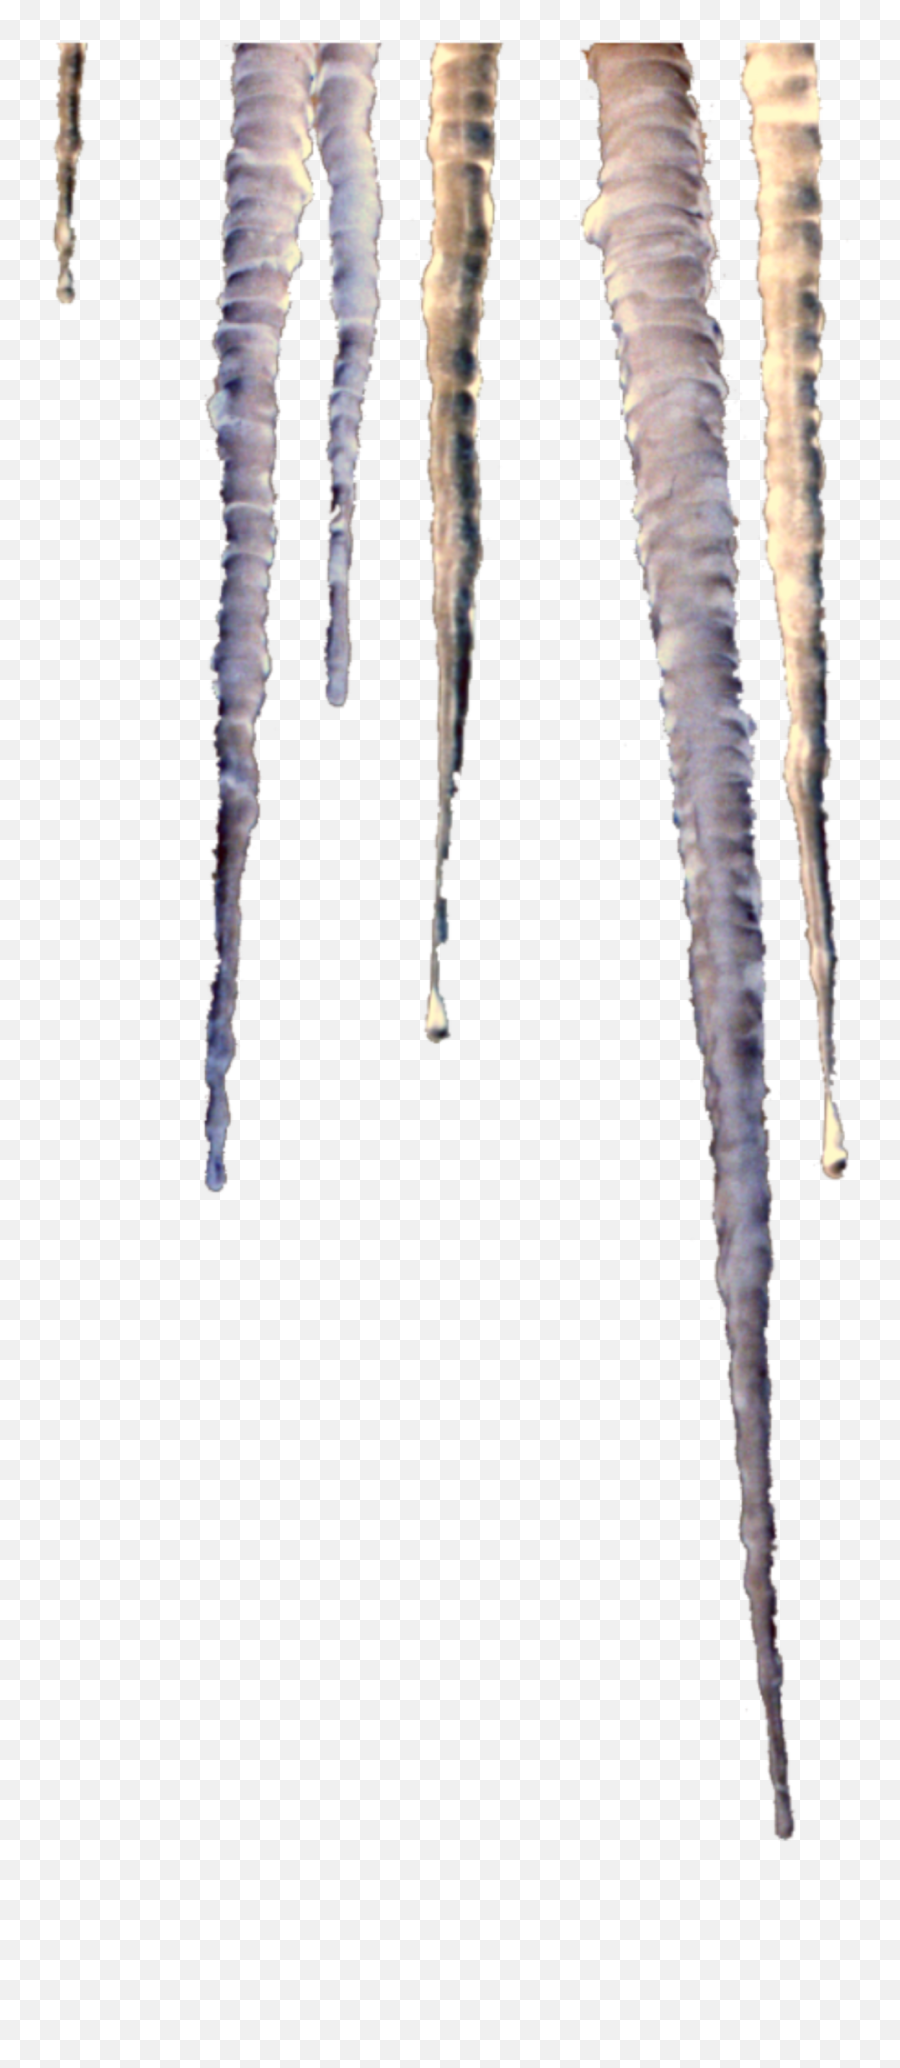 Hd Png Download - Bead,Icicle Png